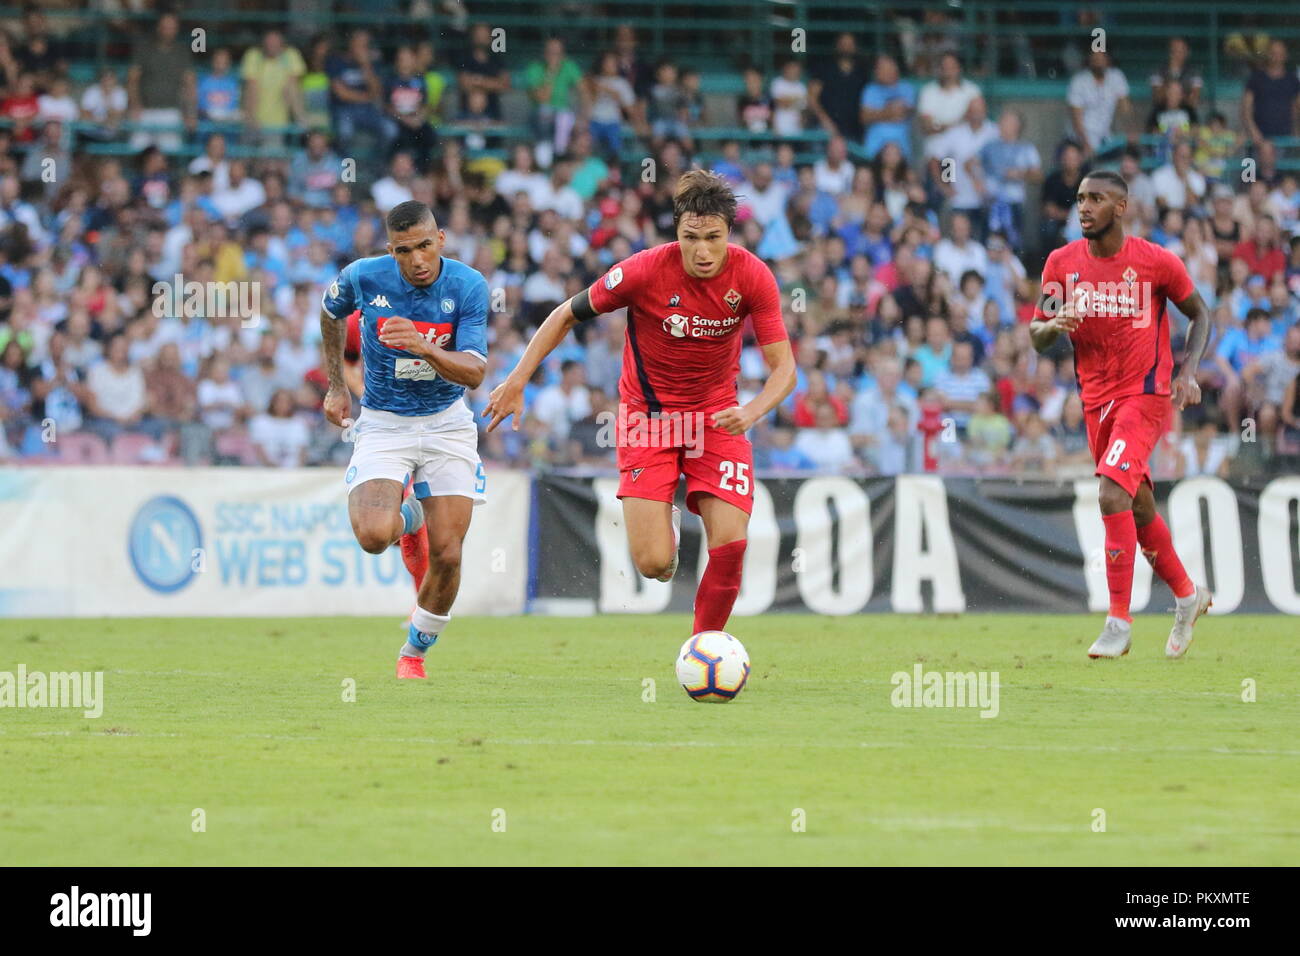 Naples, Italy. 15th September 2018. . In the picture: Chiesa, the champion of the Florentine de la national Italian football club.Stadium San Paolo Naples - 09/15/2018 - Italy.final result SSC Napoli 1 AC Fiorentina 0. Credit: Fabio Sasso/ZUMA Wire/Alamy Live News Stock Photo